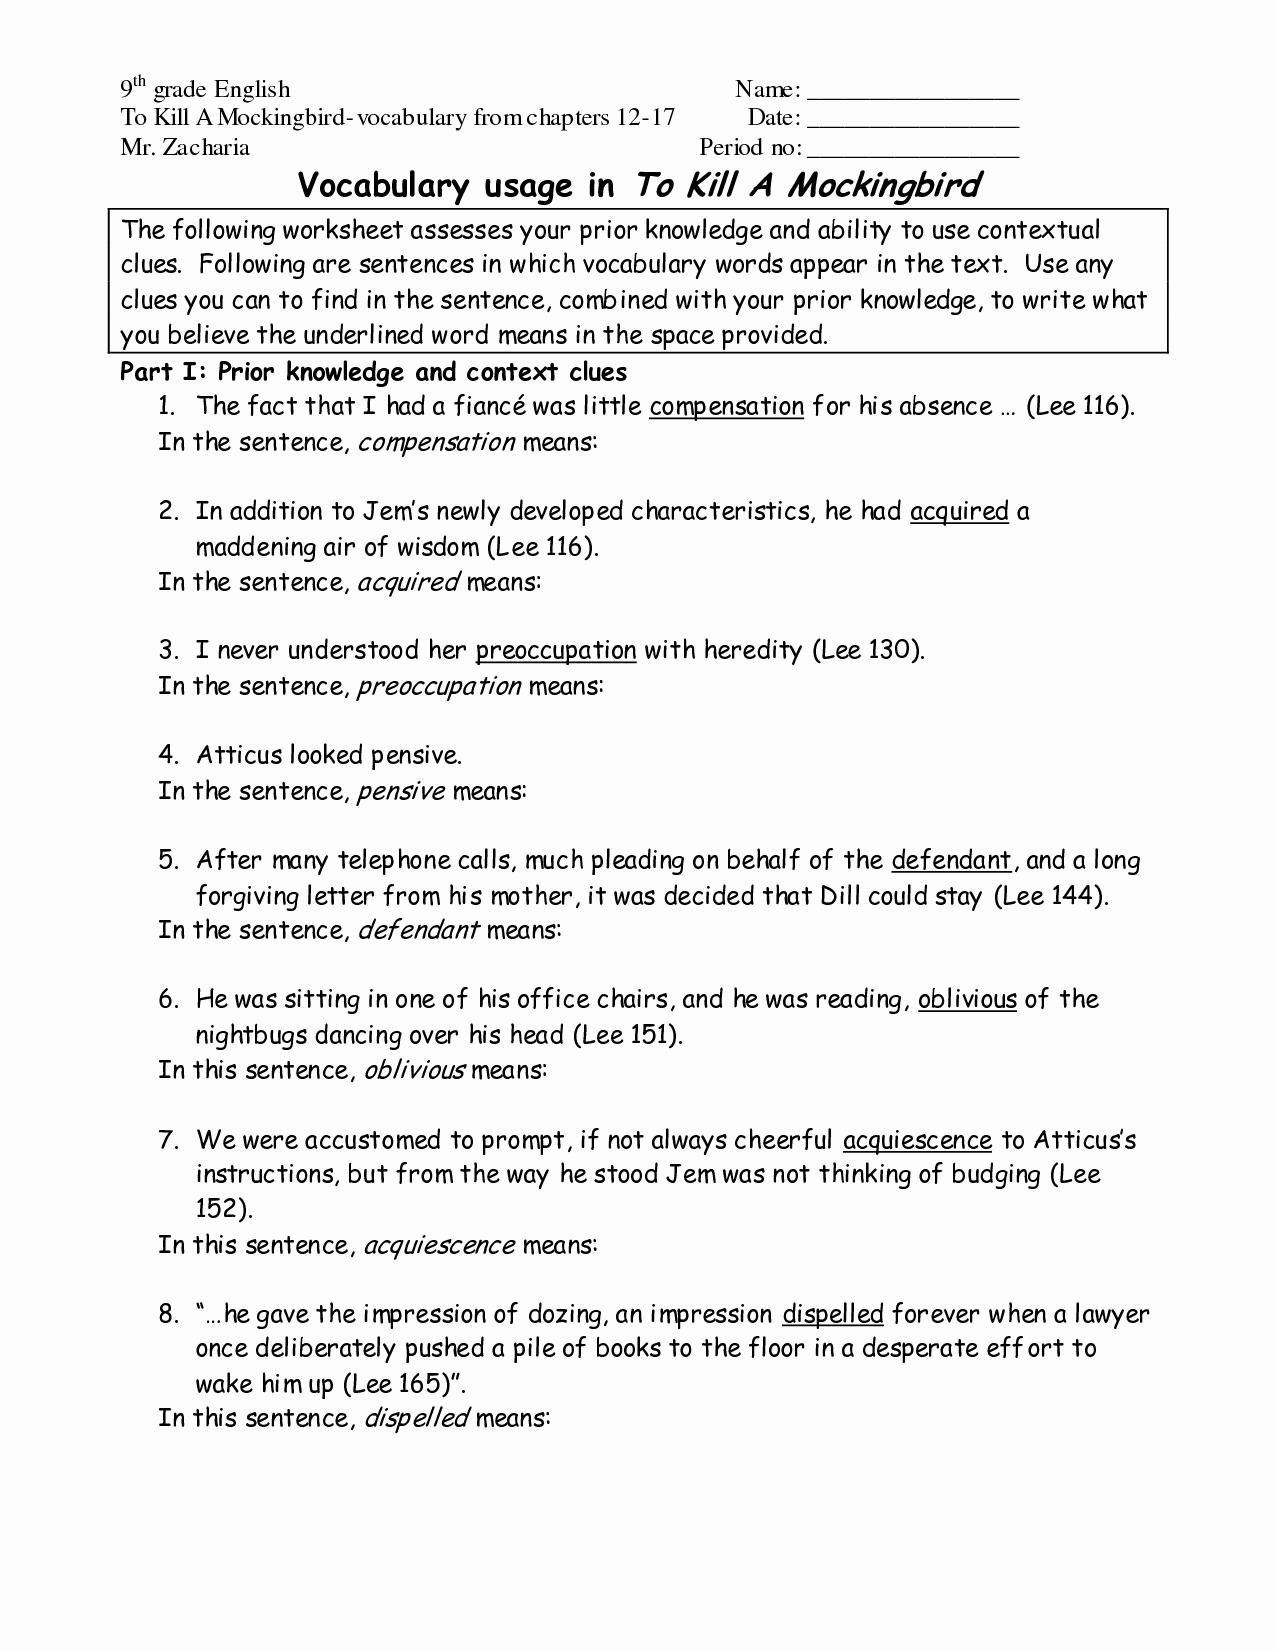 9th Grade Vocabulary Worksheet Beautiful 9th Grade Worksheet Category Page 2 Worksheeto